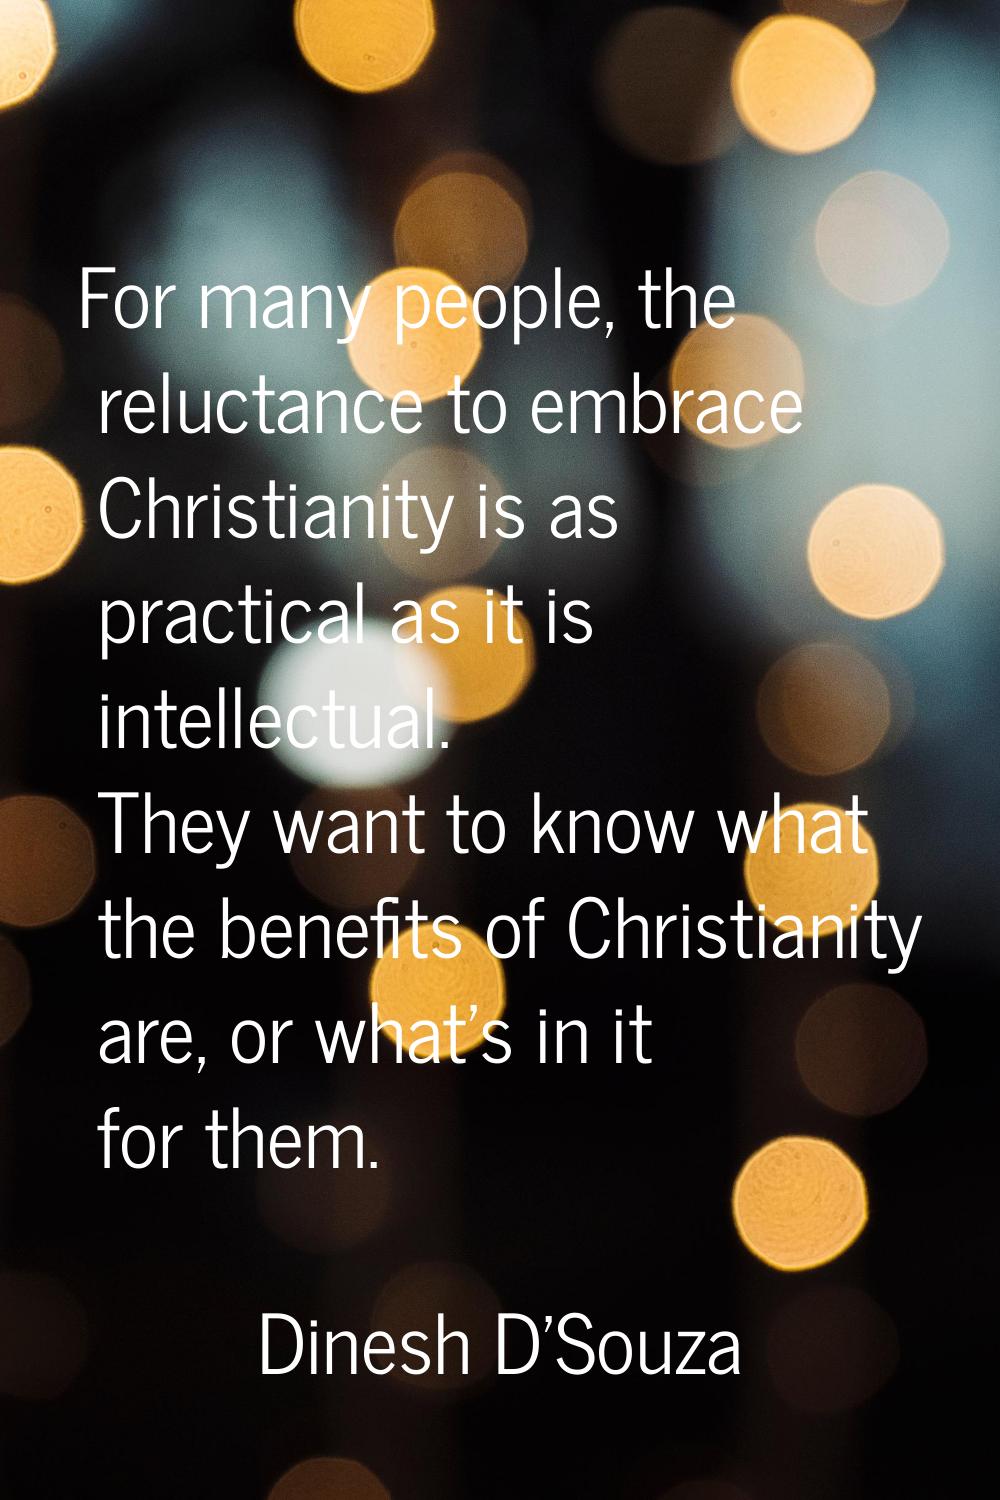 For many people, the reluctance to embrace Christianity is as practical as it is intellectual. They